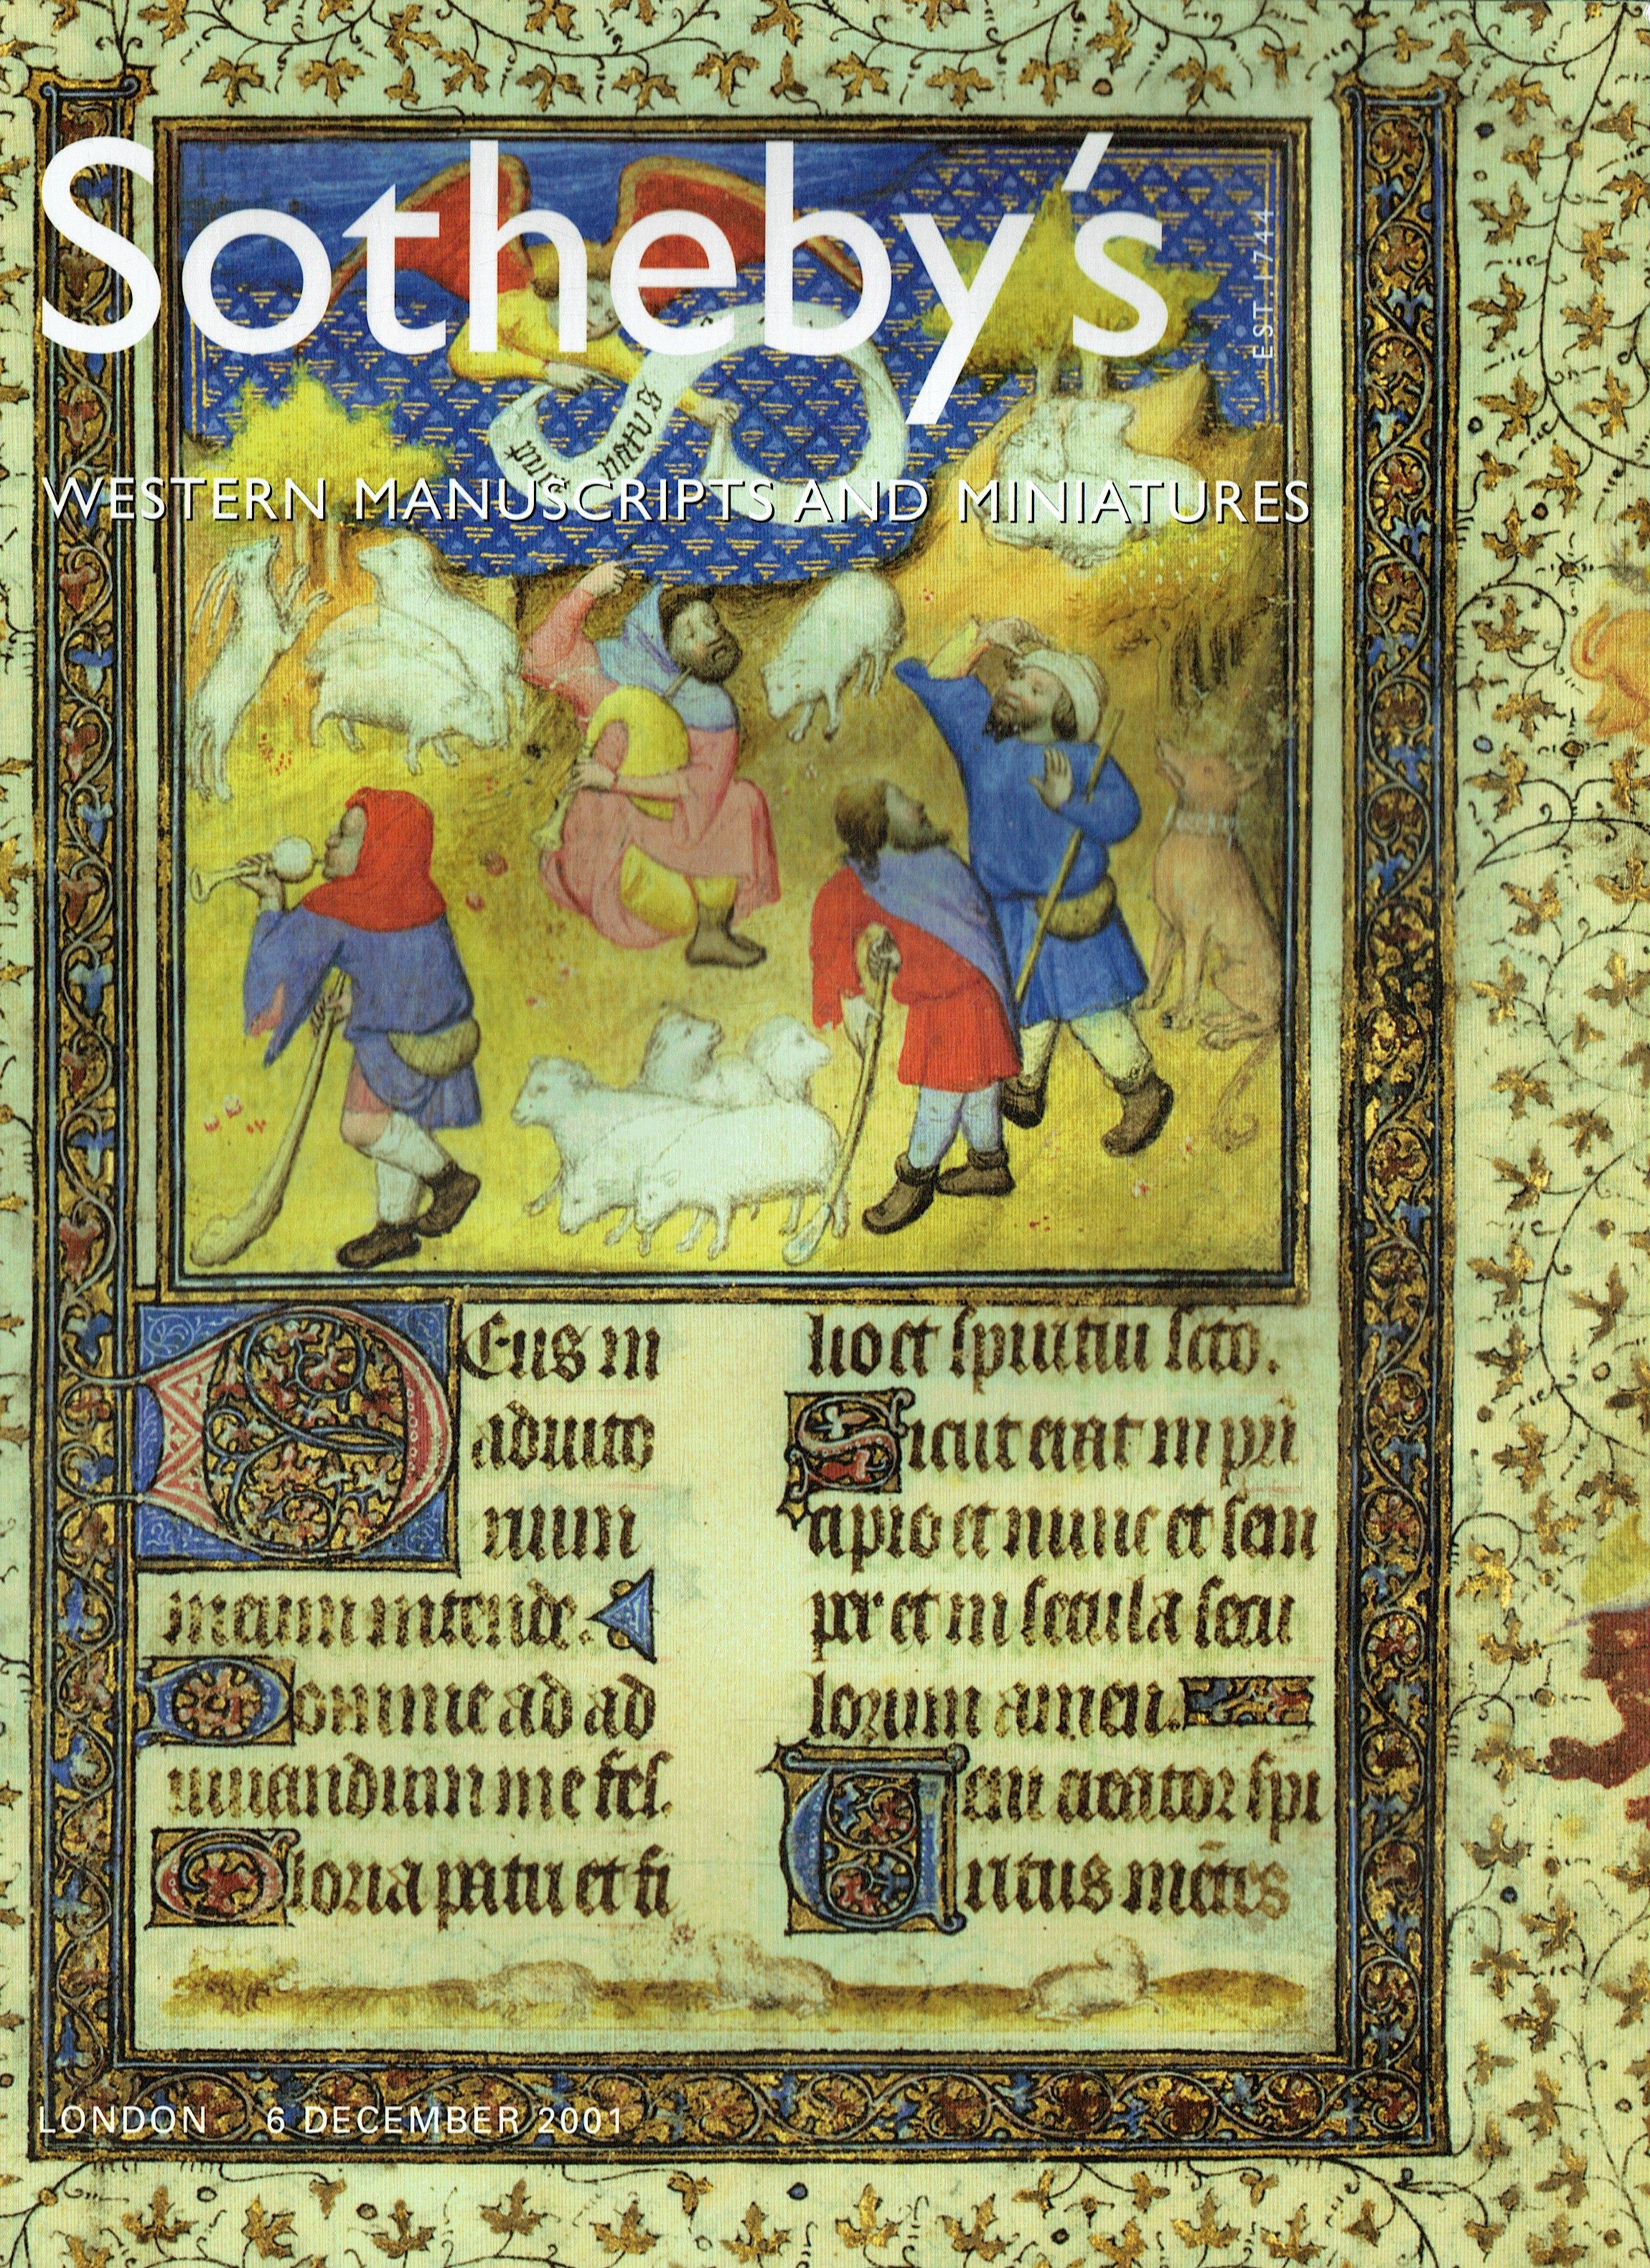 Sothebys December 2001 Western Manuscripts and Miniatures (Digitial Only)